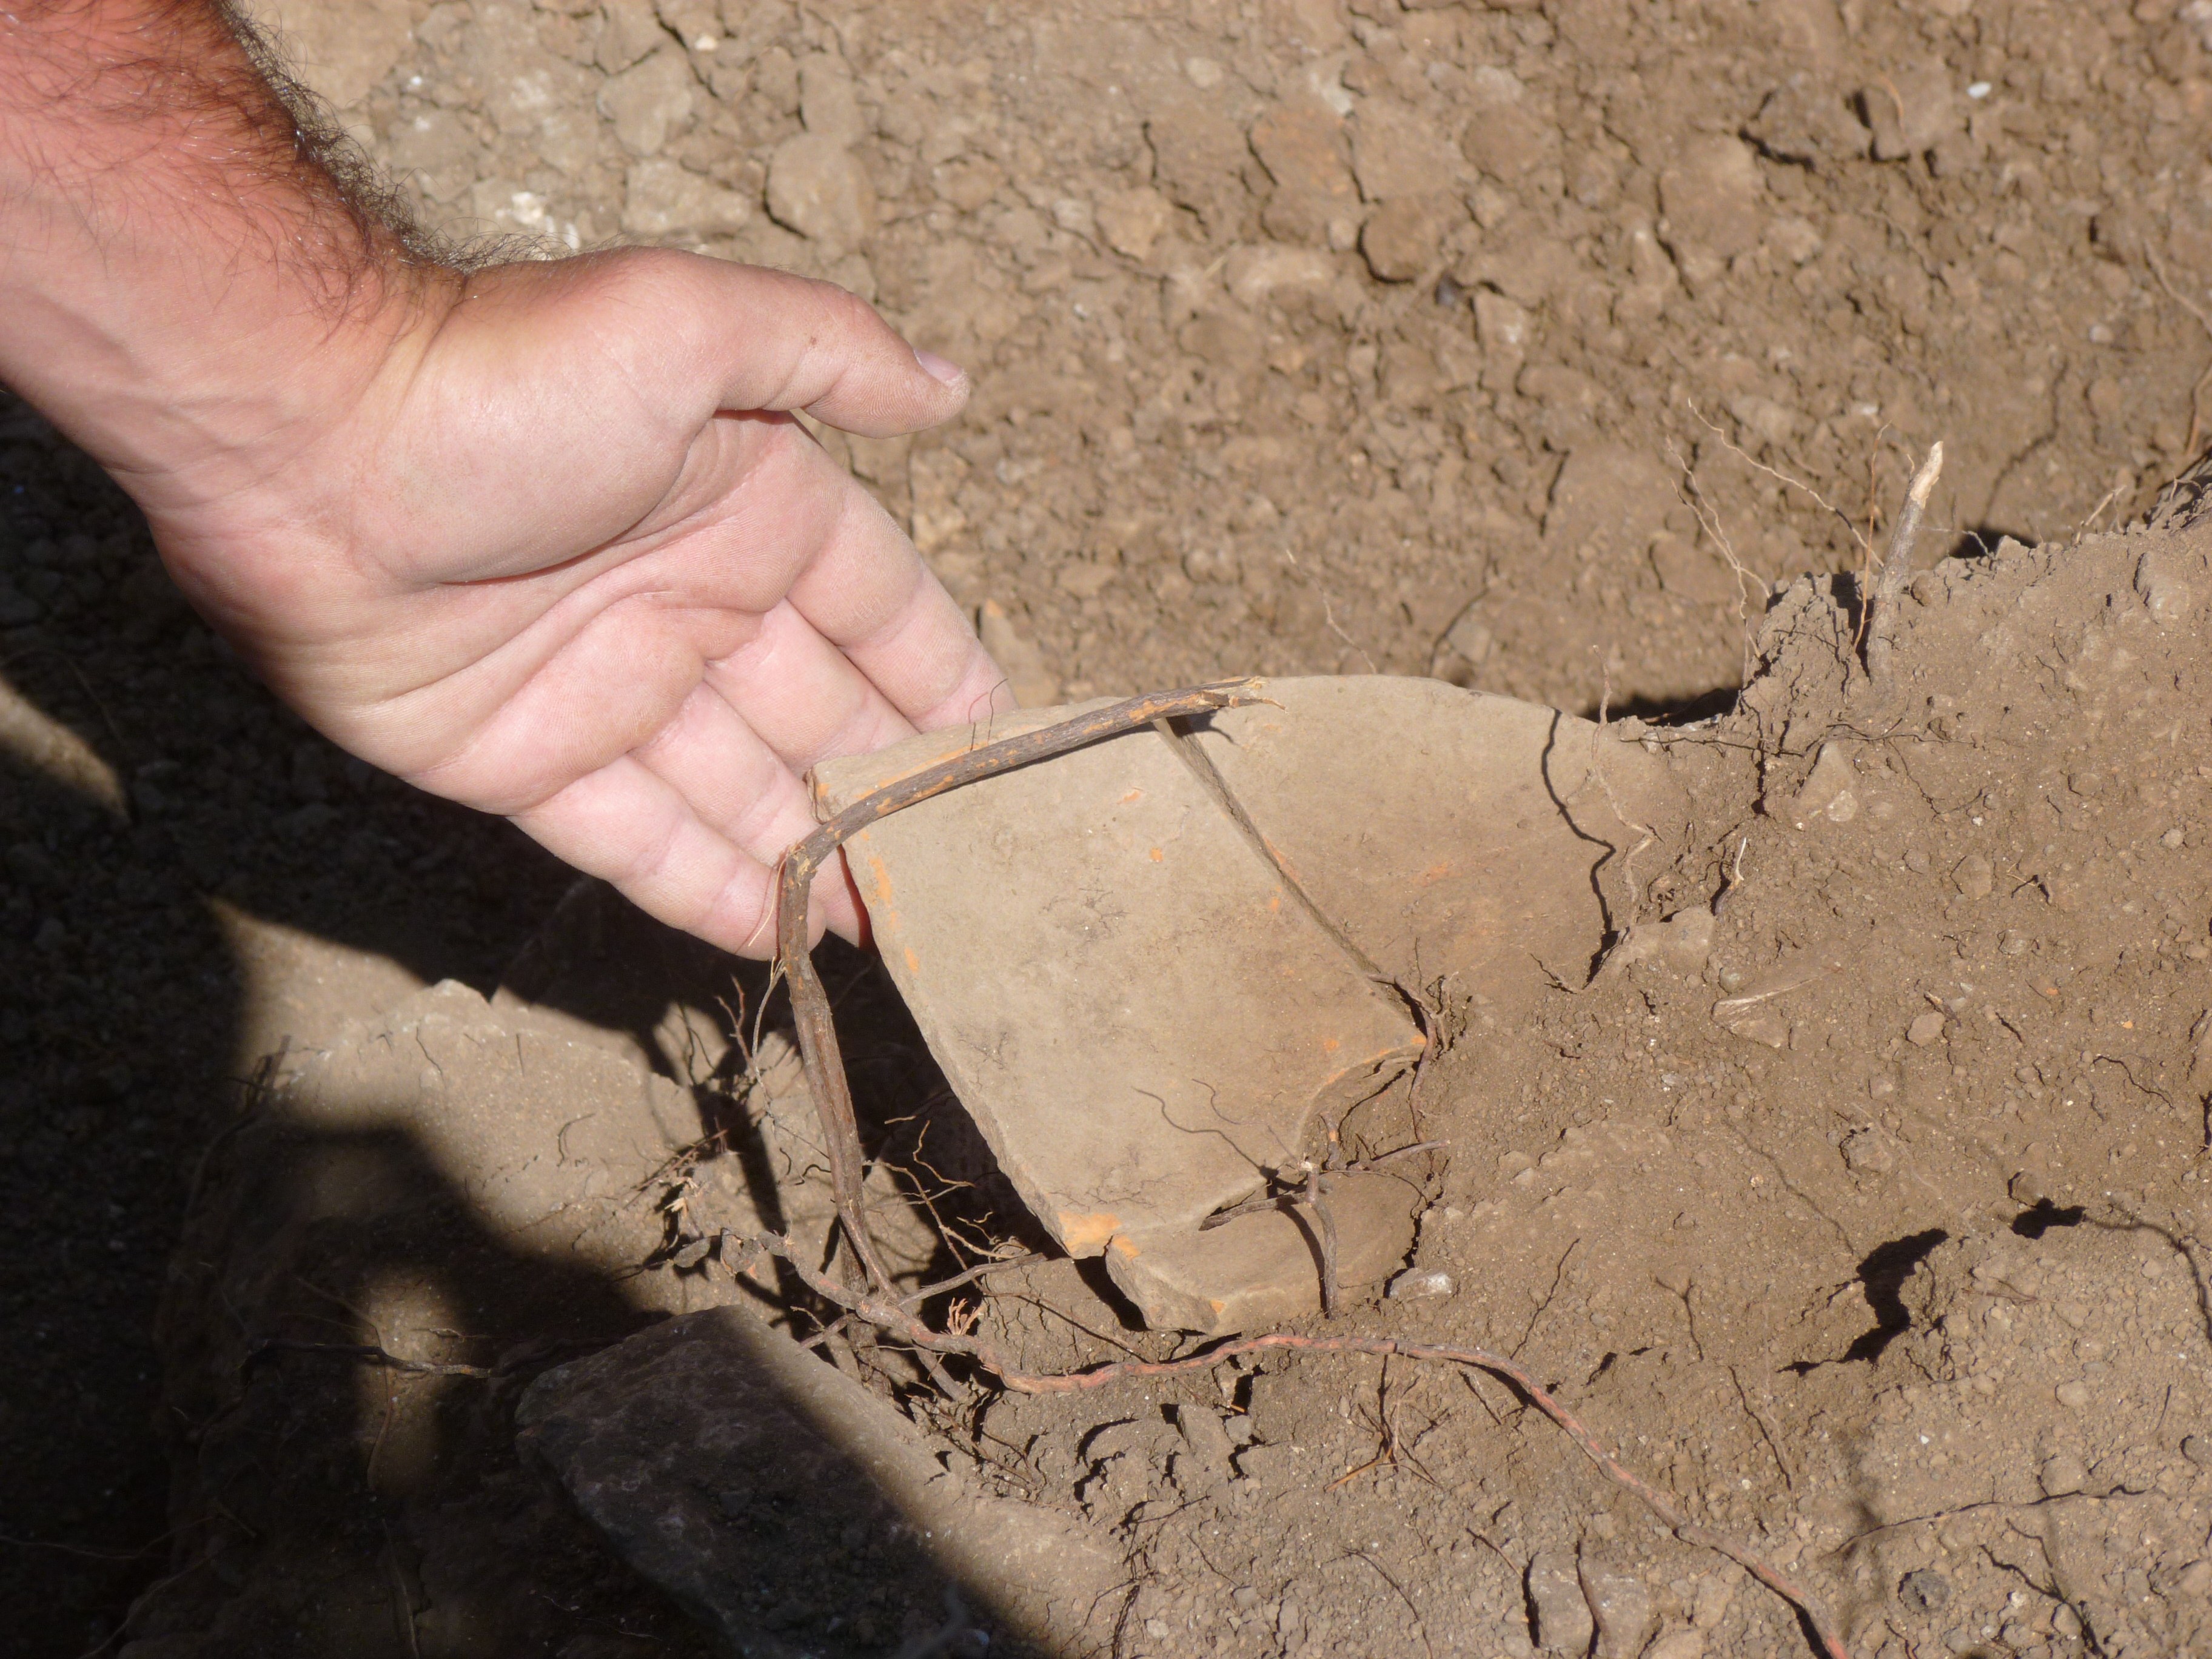 Fragments of a plate found in situ.